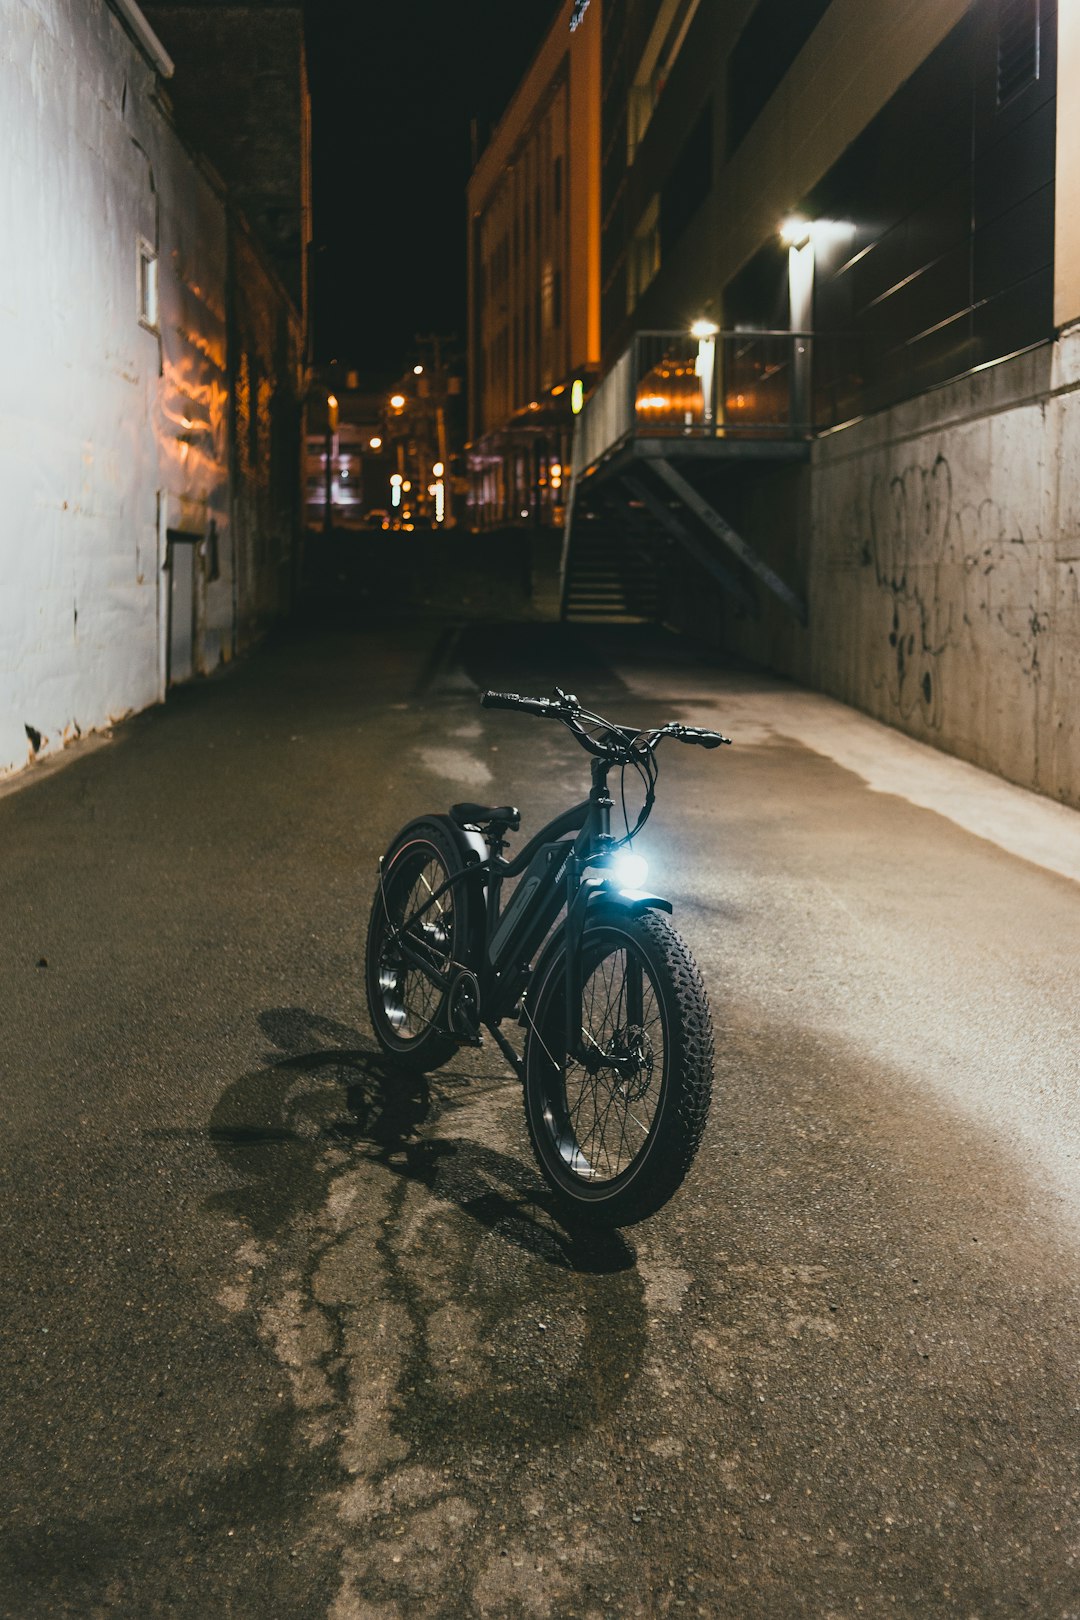 black motorcycle parked beside the road during night time